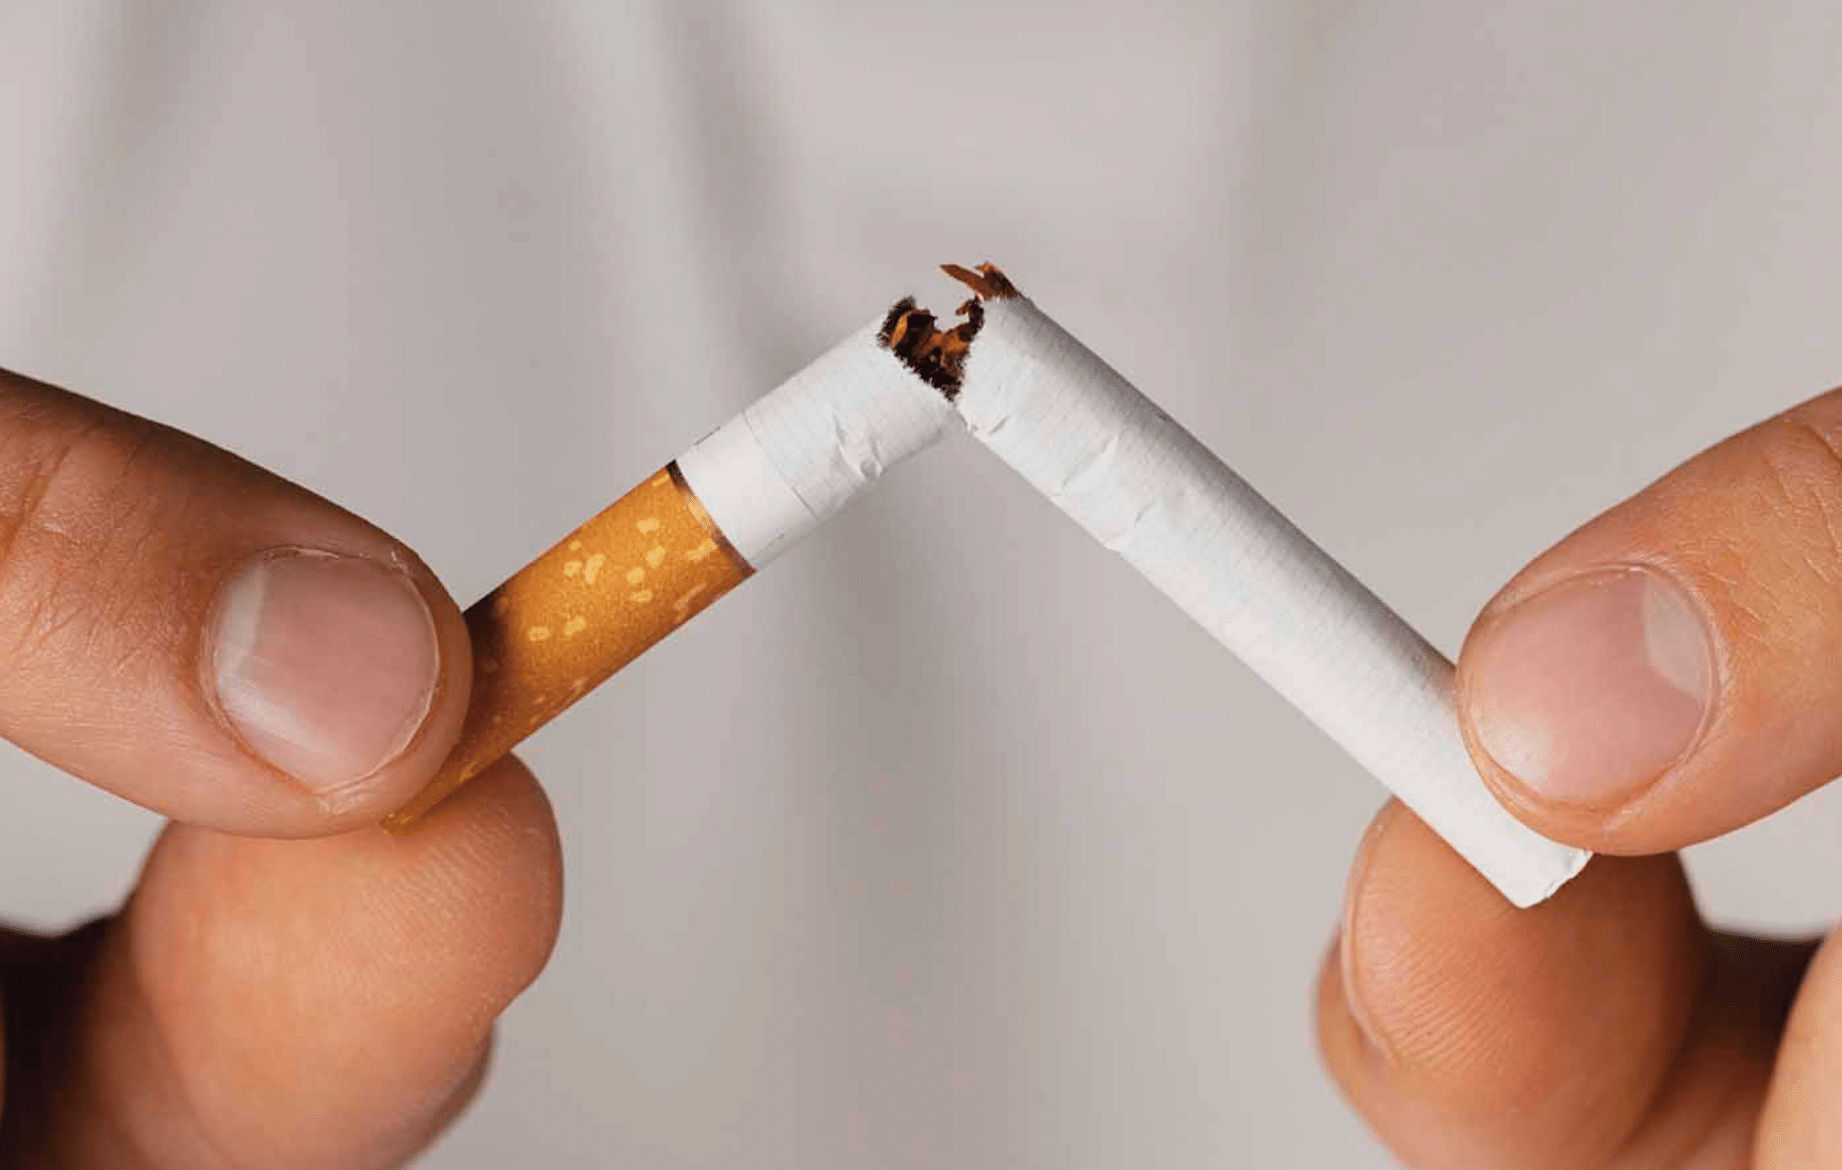 How to Eliminate Tobacco Cravings